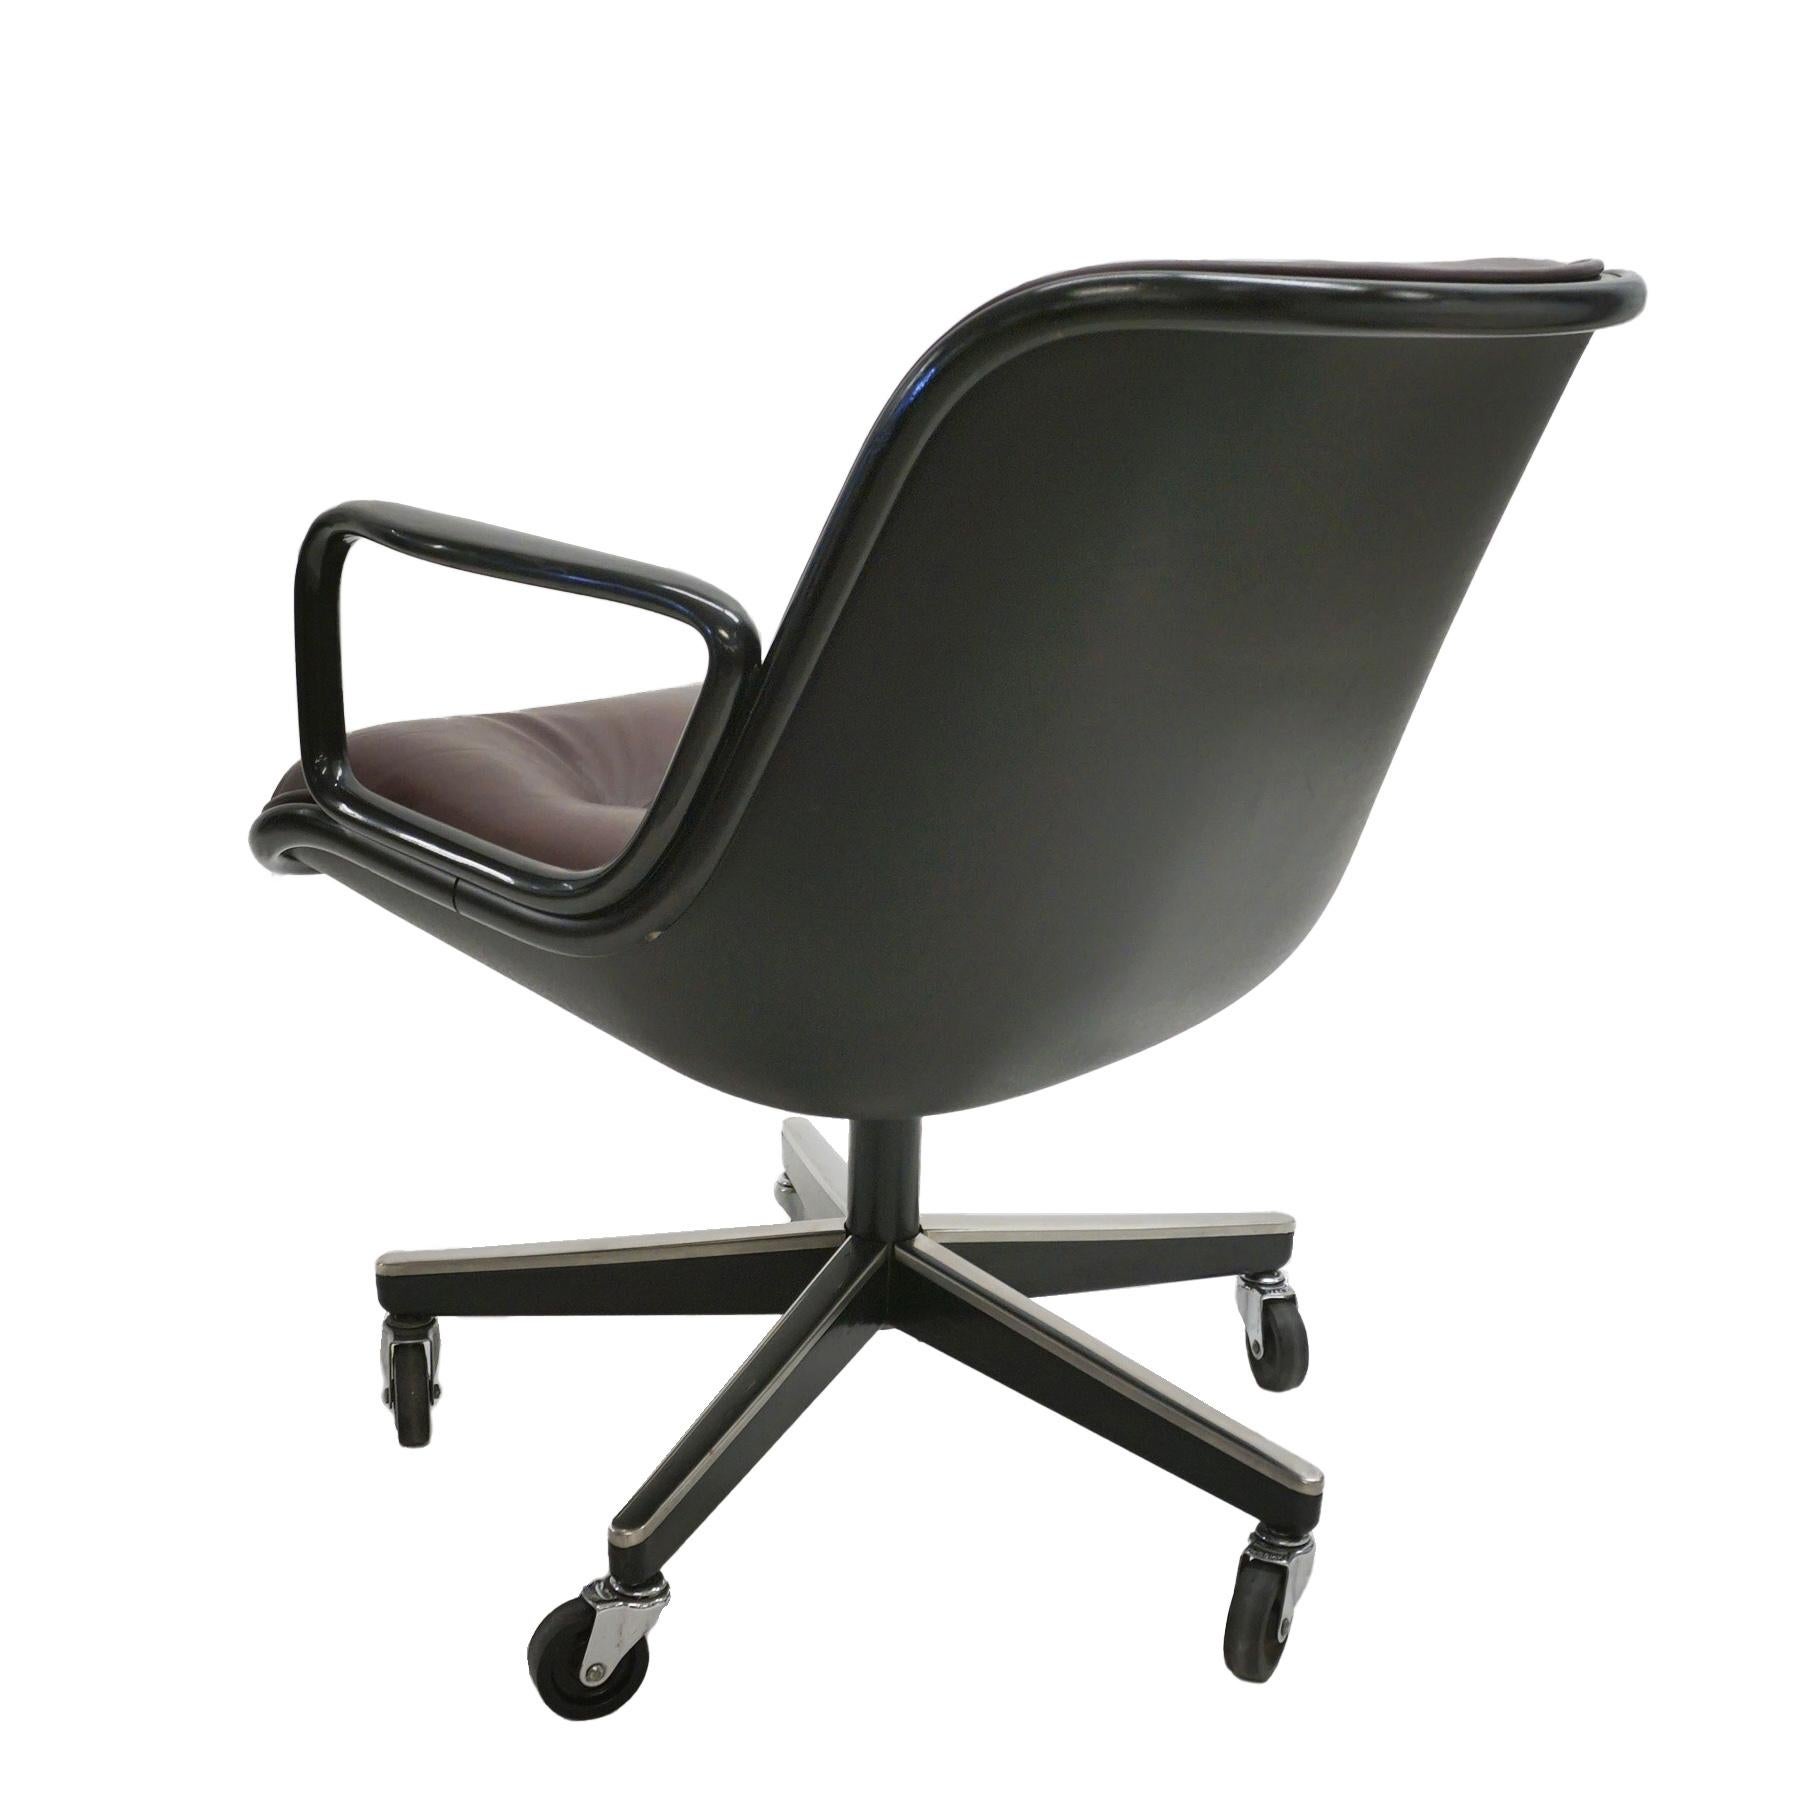 North American Knoll Pollock Executive Chair in Aubergine Leather, Matte Black Frame For Sale